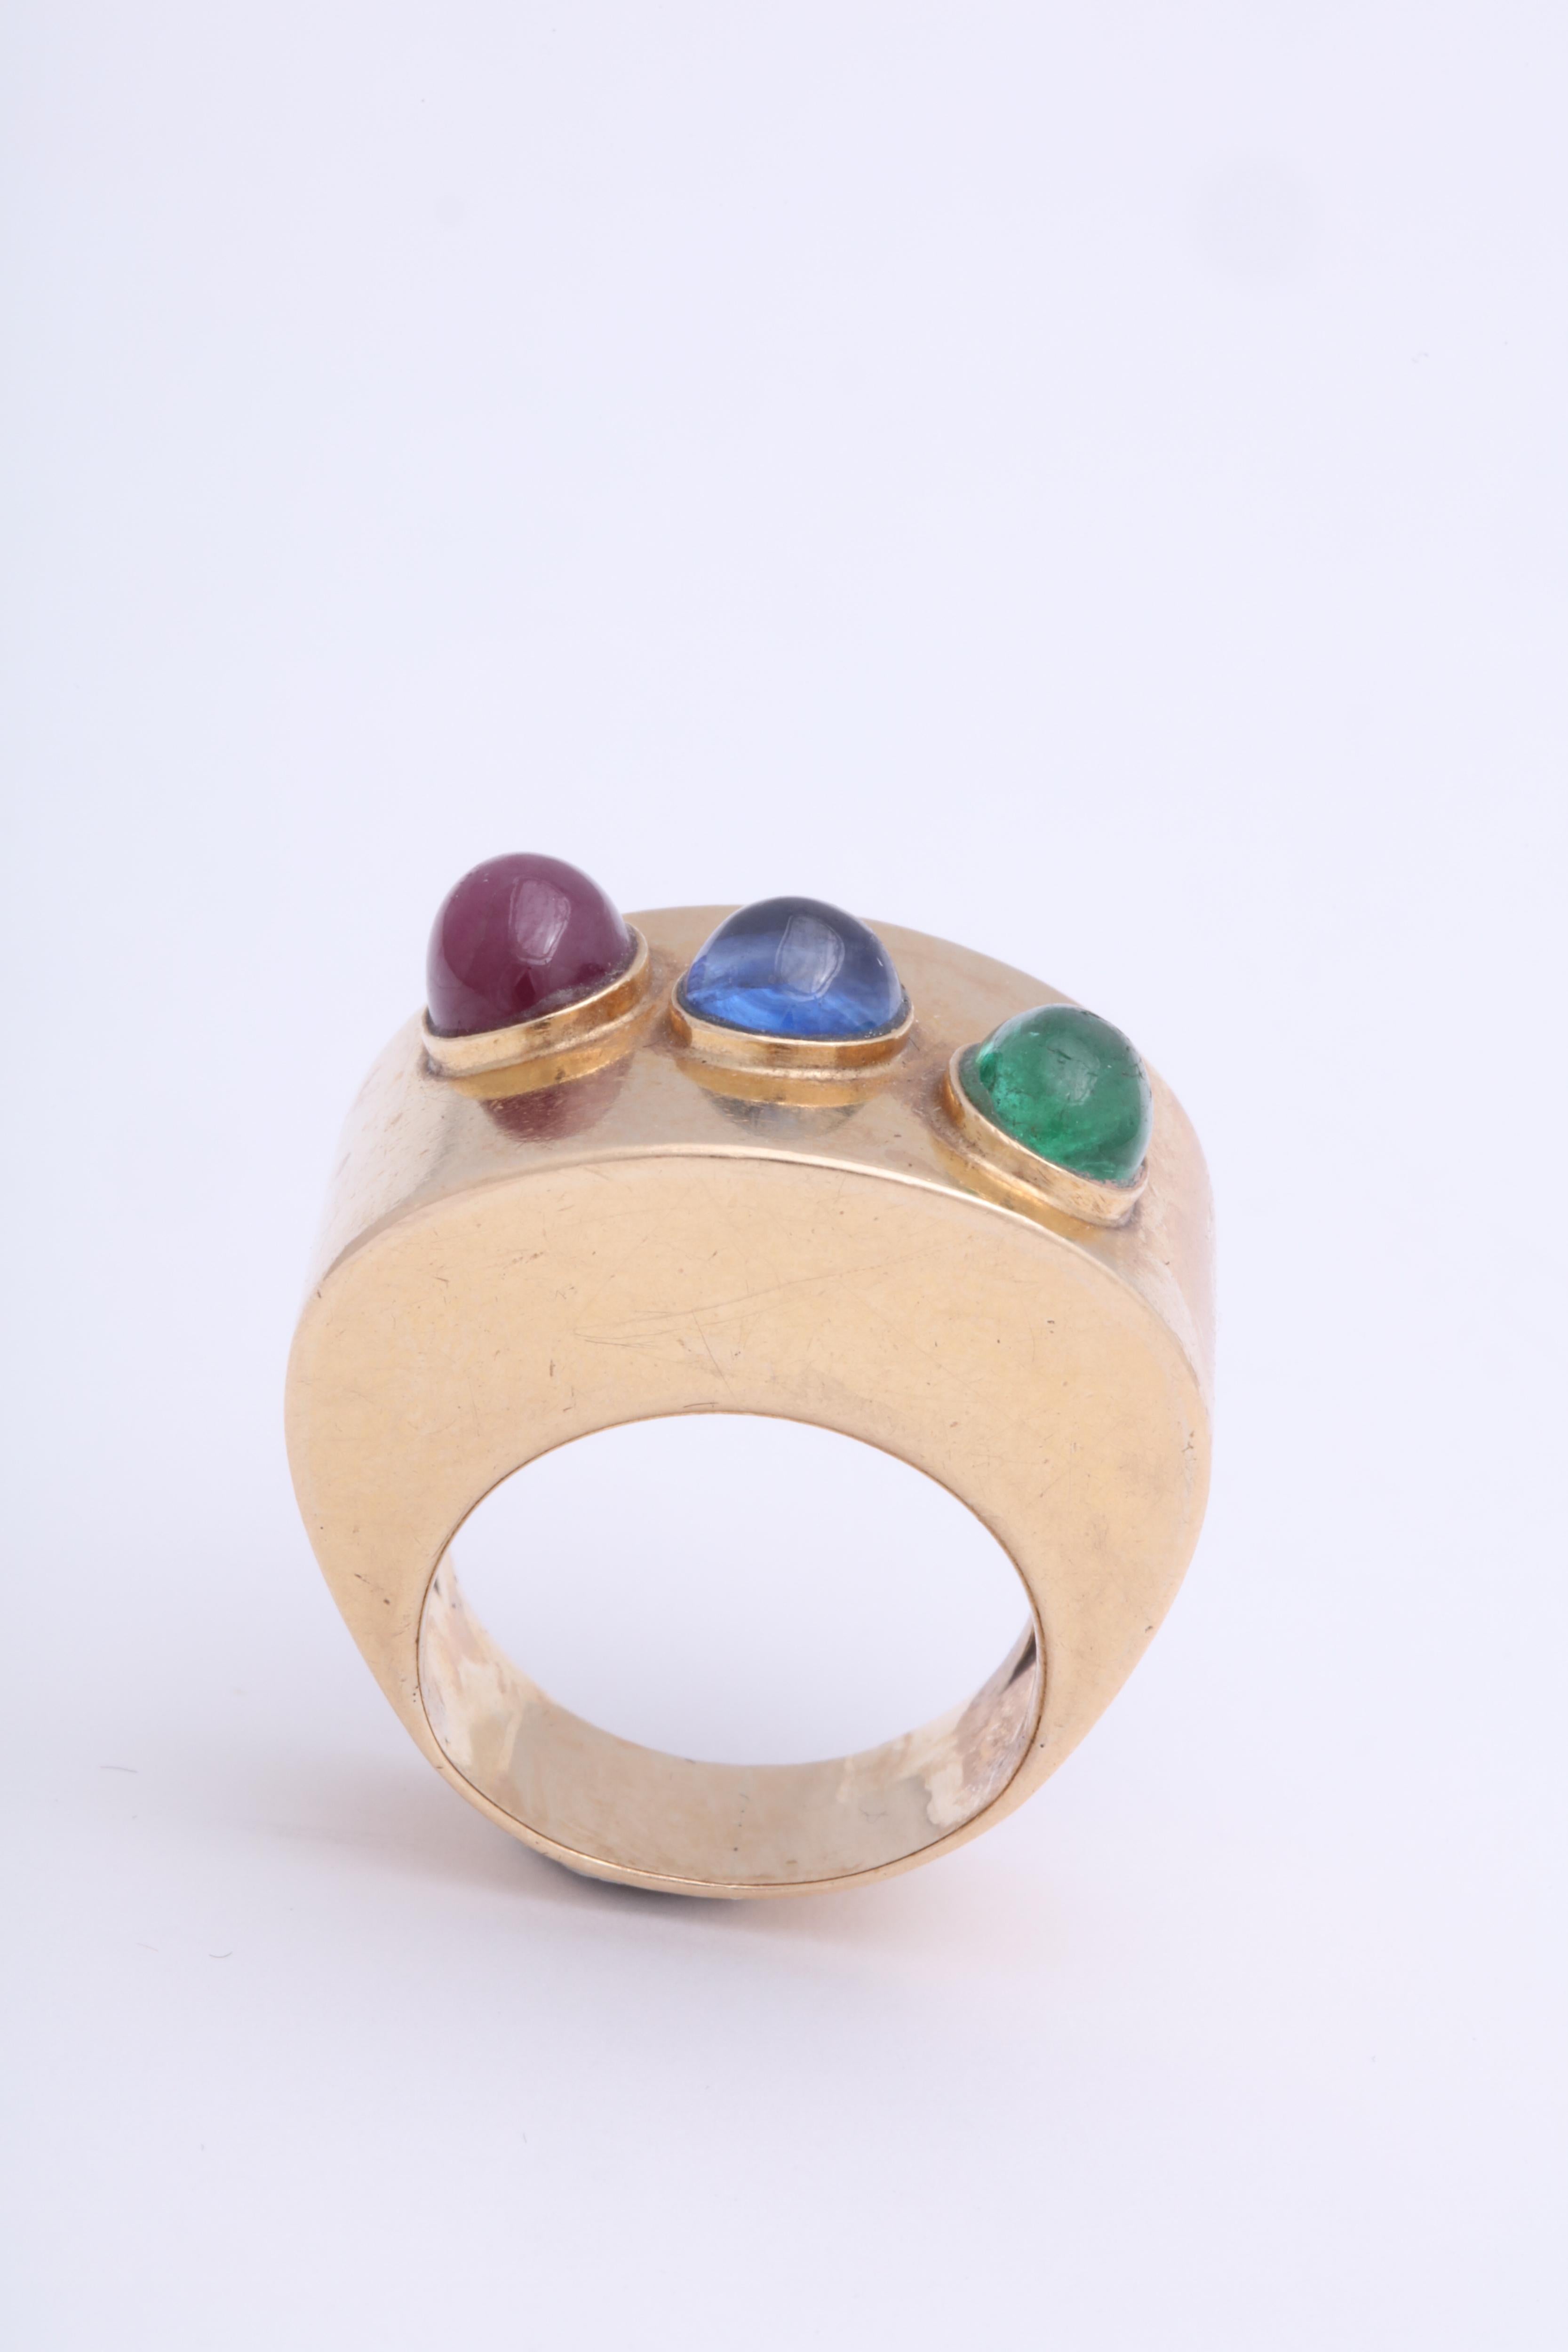 Retro Wide Band with Cabochon Ruby, Sapphire and Emerald Ring For Sale ...